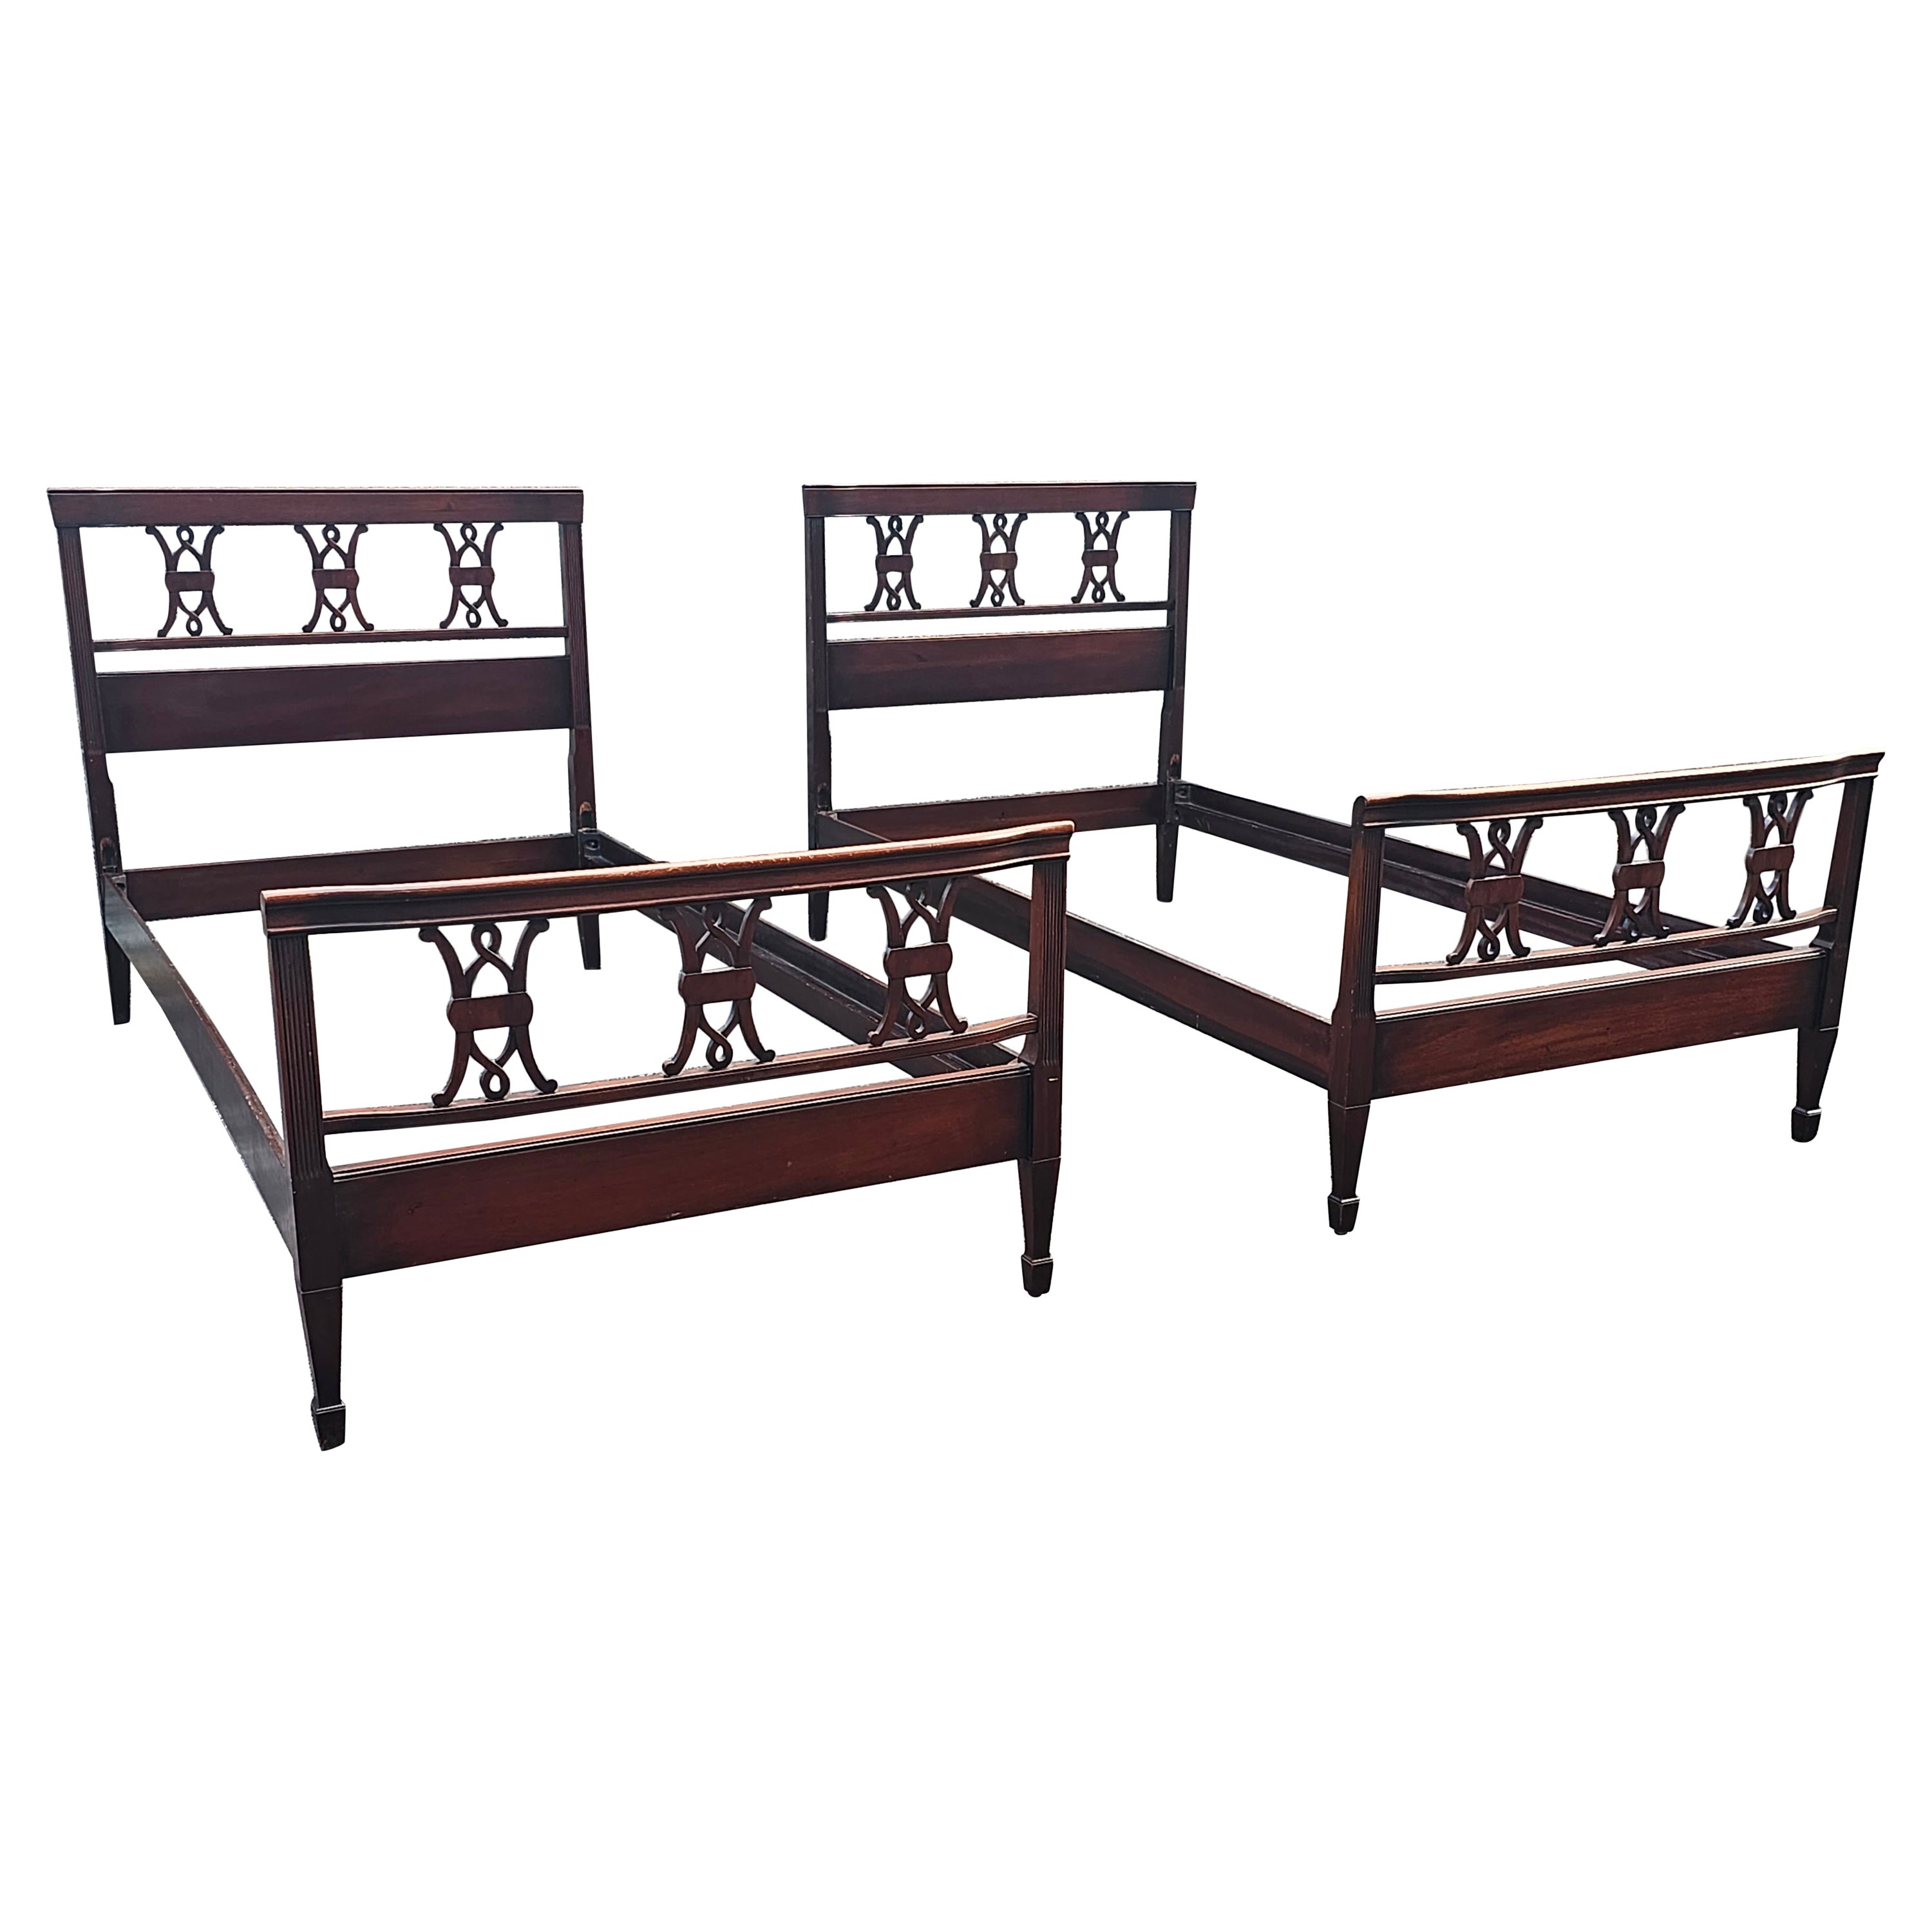 Early 20th Century Kindel Oxford Mahogany Chippendale Twin Bedstead, Pair For Sale